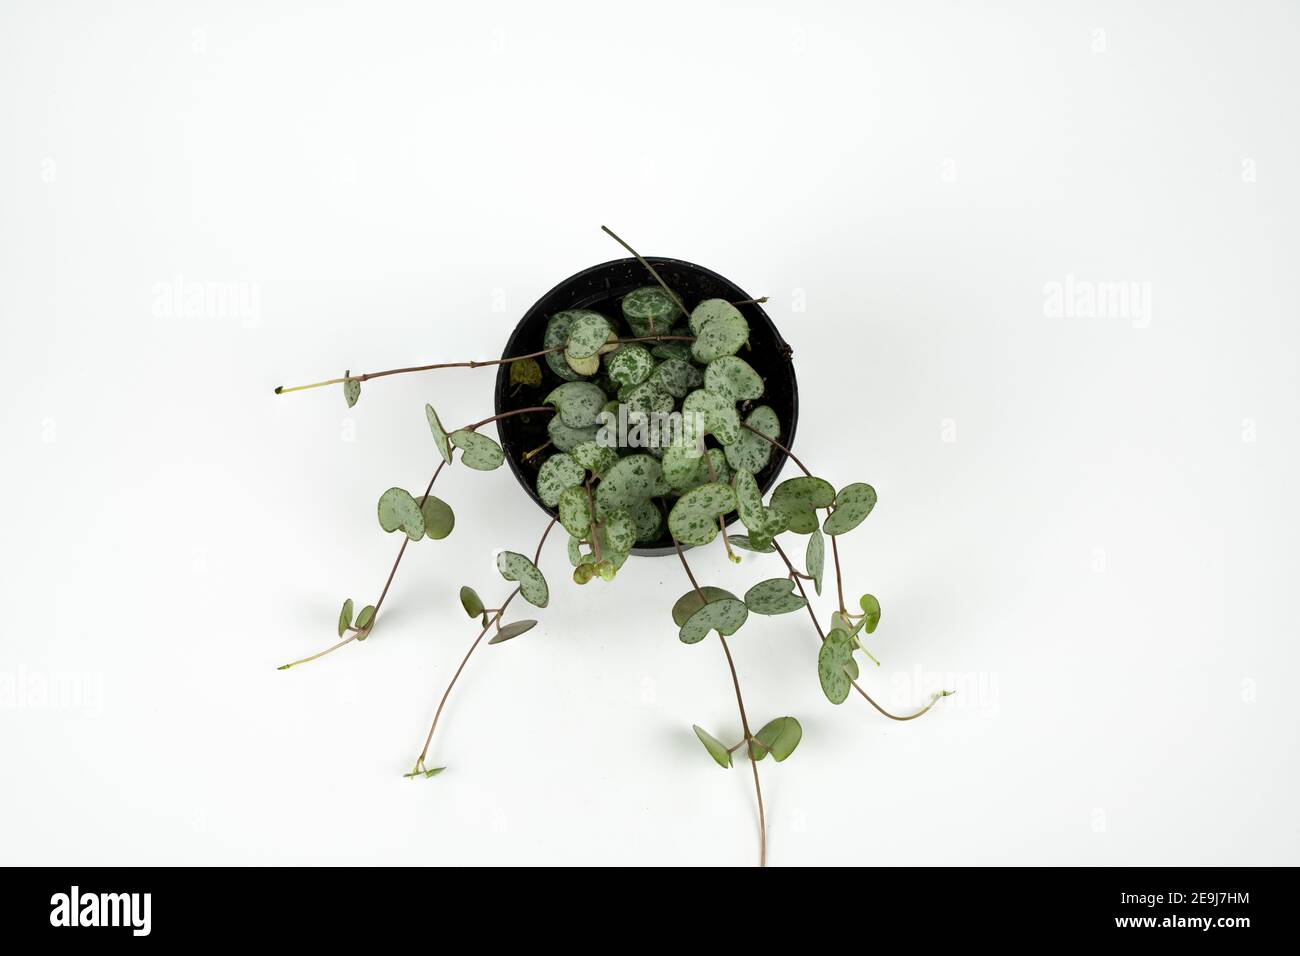 ceropegia woodii in pot on white background, overhead view Stock Photo